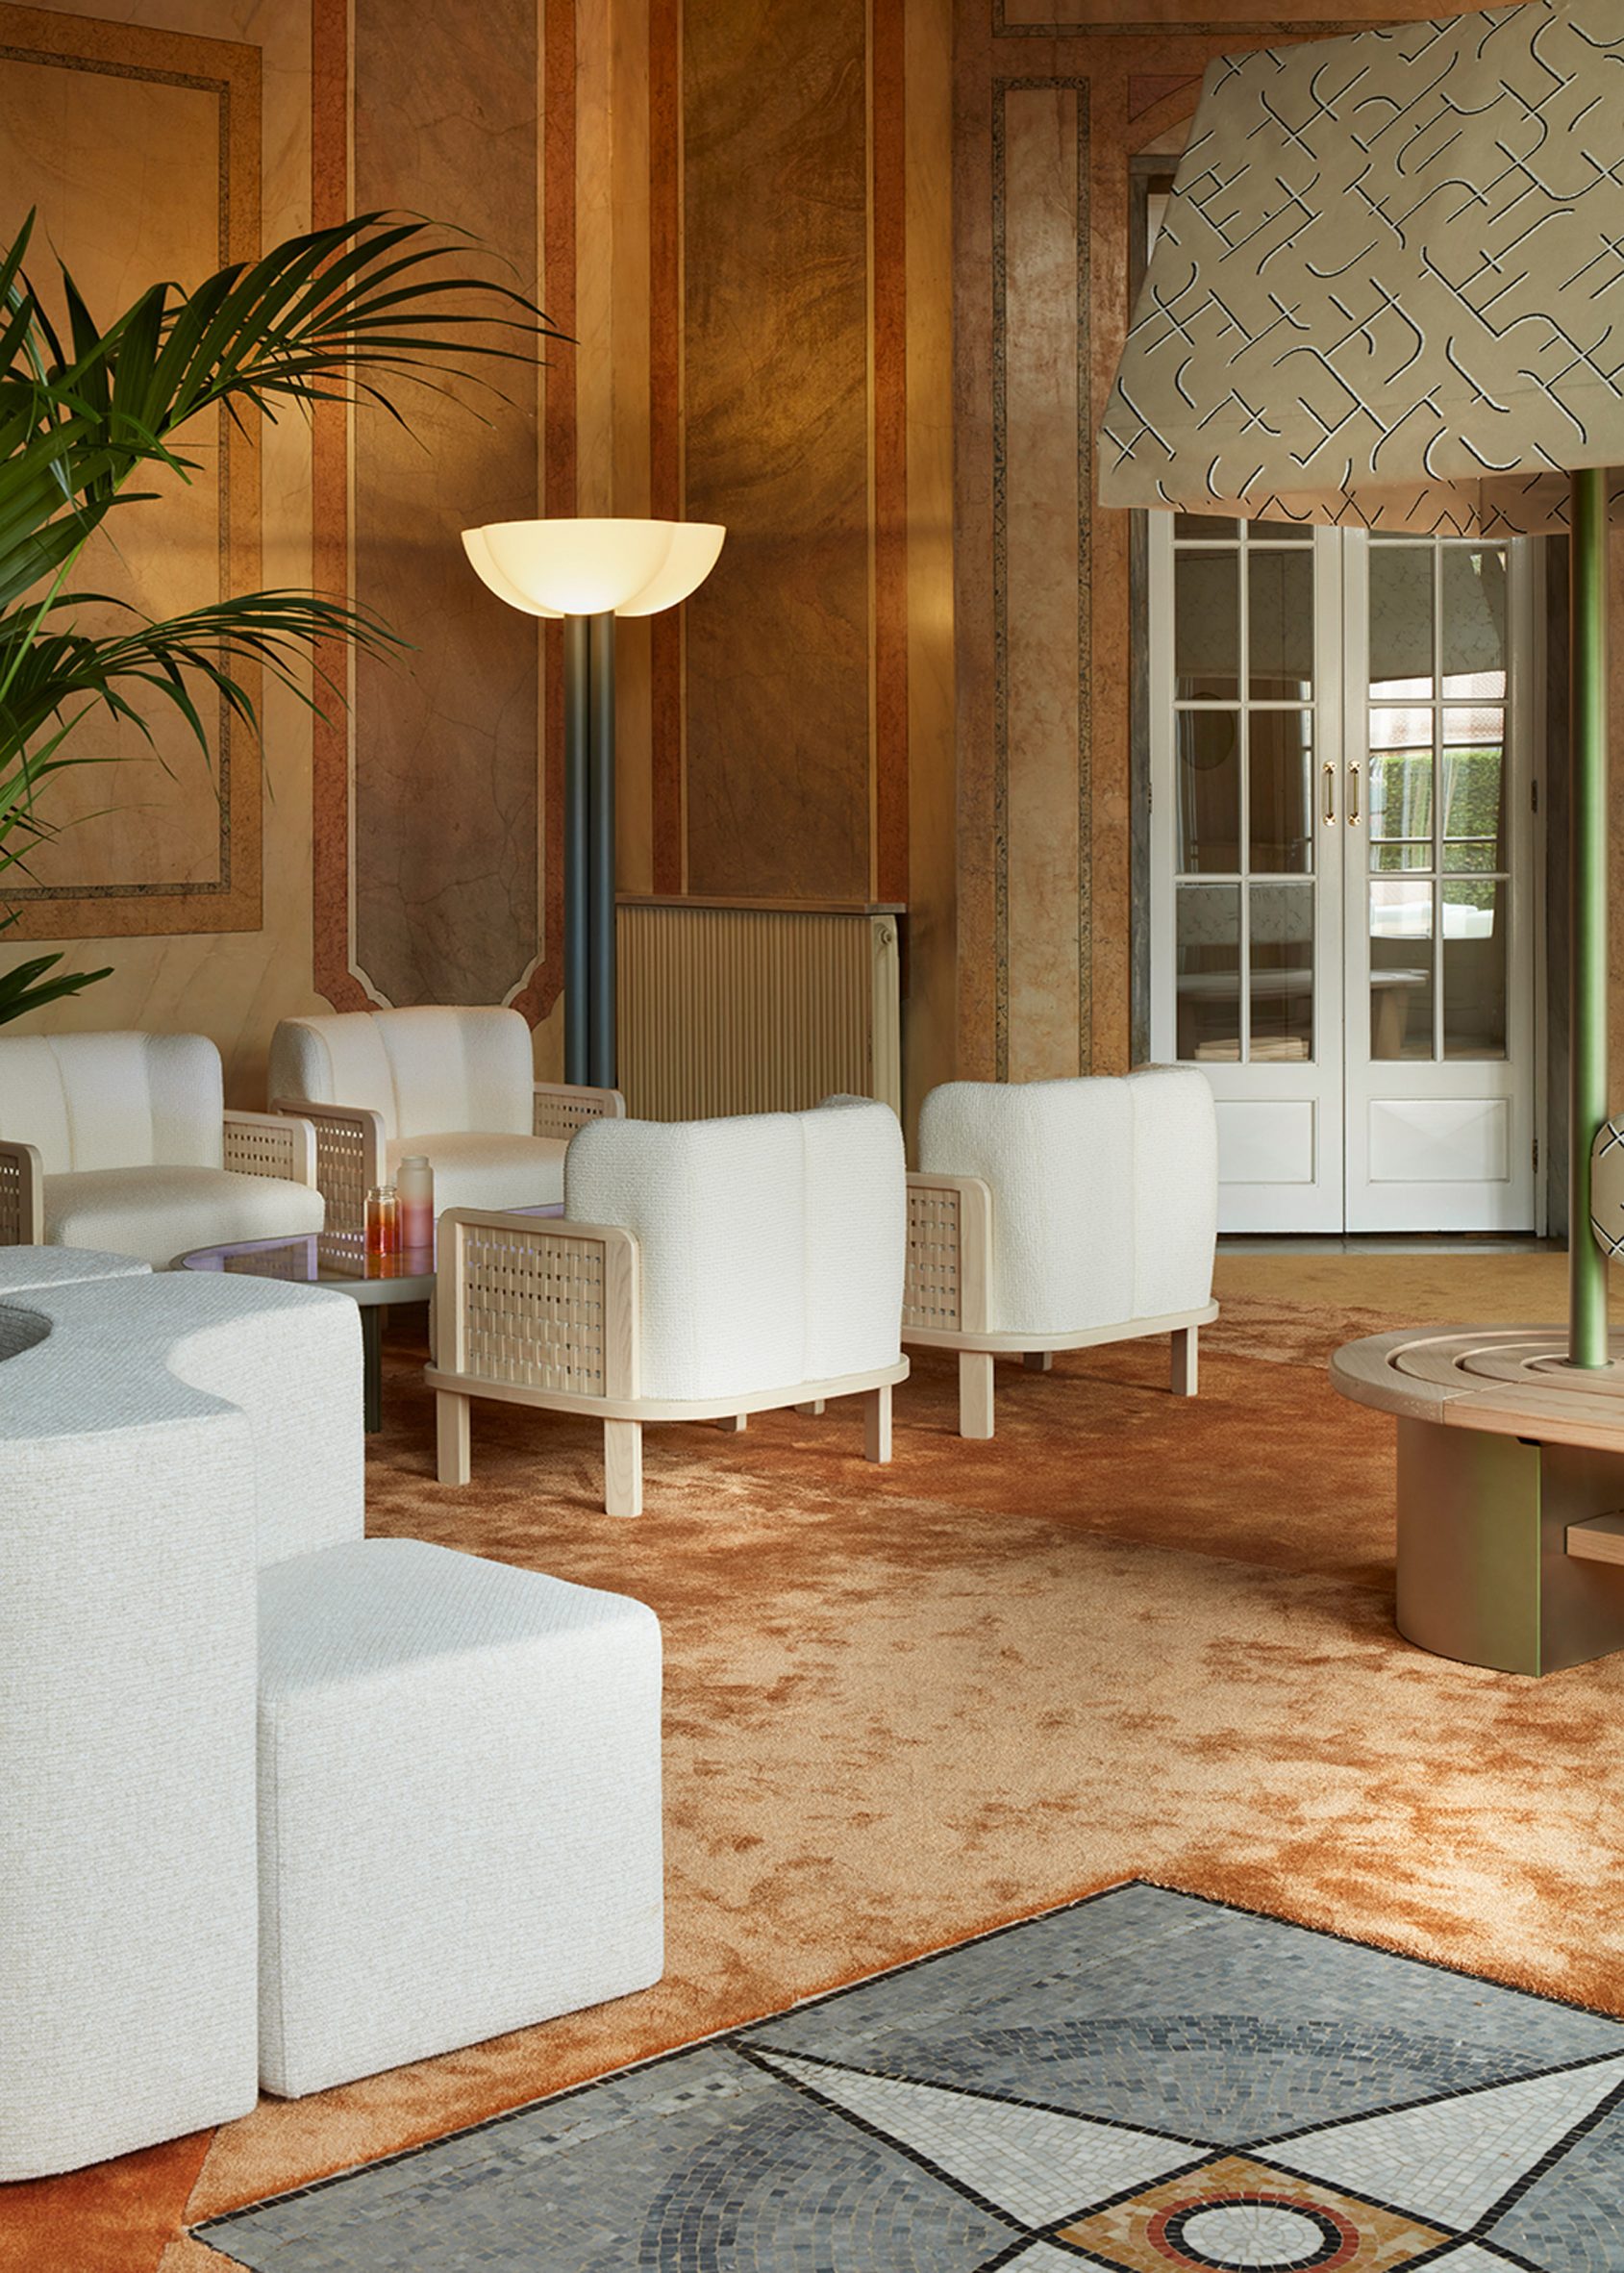 Chairs in Clay Court Club installation at Milan design week by Cristina Celestino